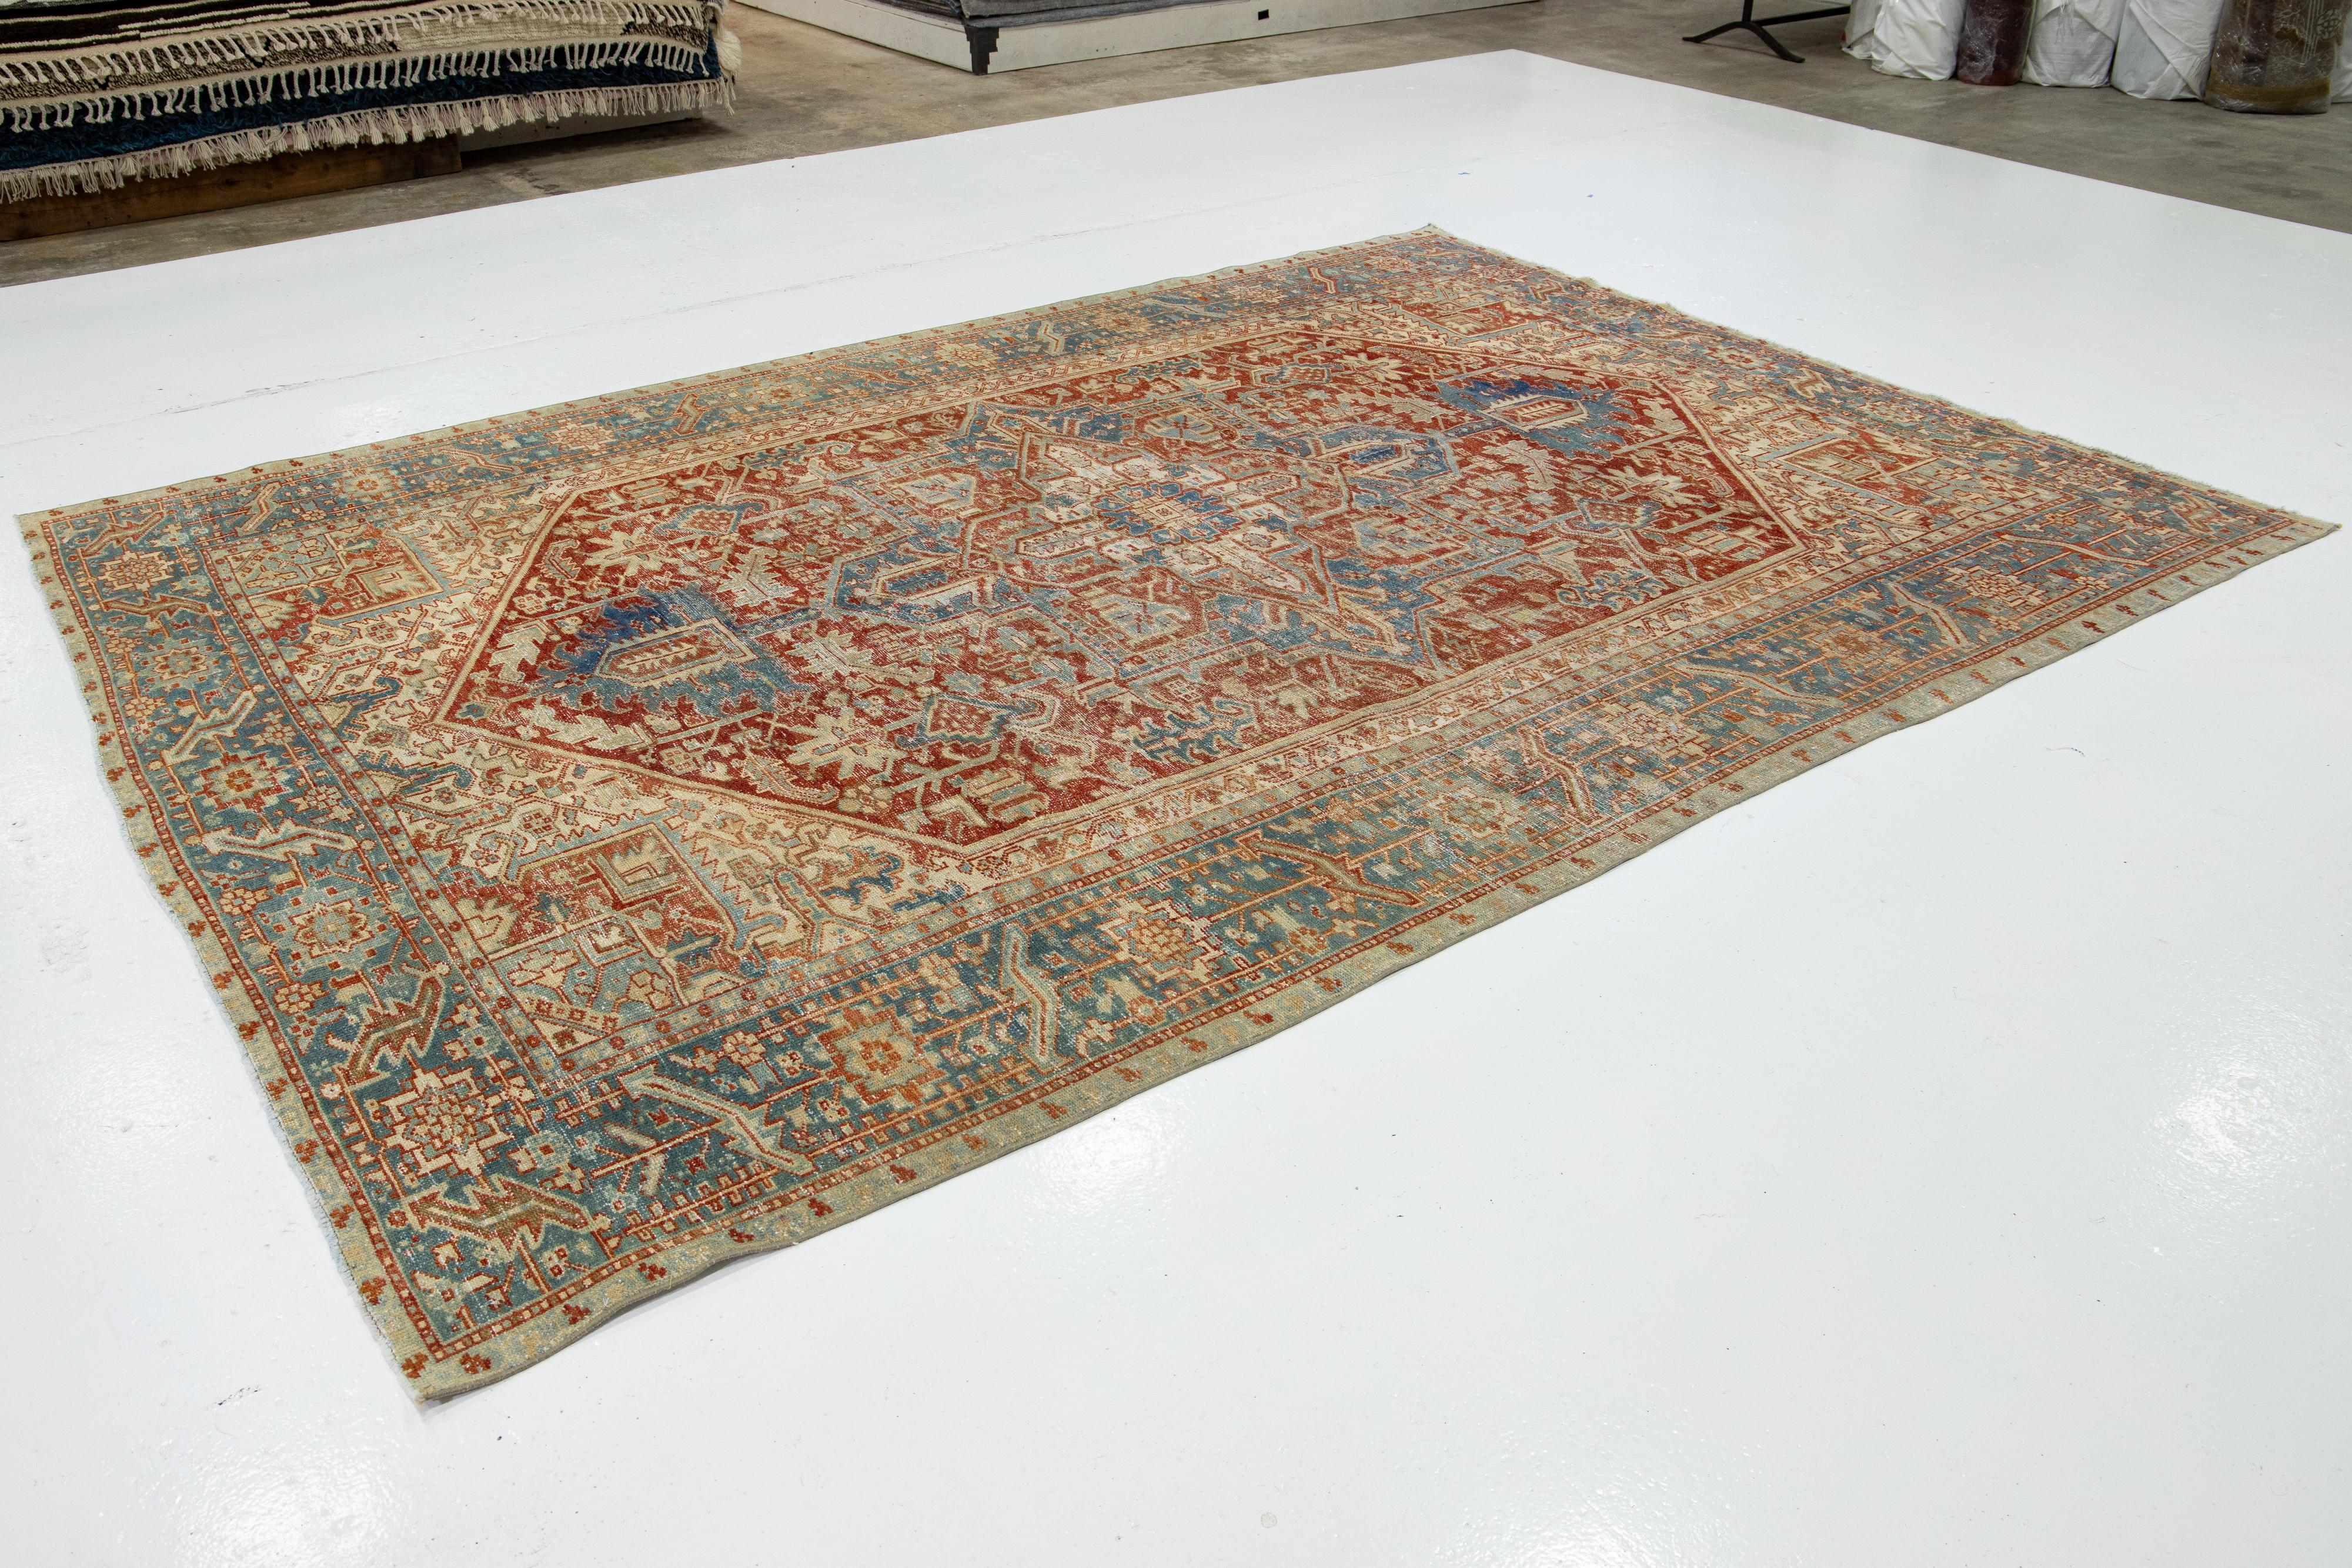 Antique Red Wool Rug Persian Heriz Featuring a Medallion Motif  In Excellent Condition For Sale In Norwalk, CT